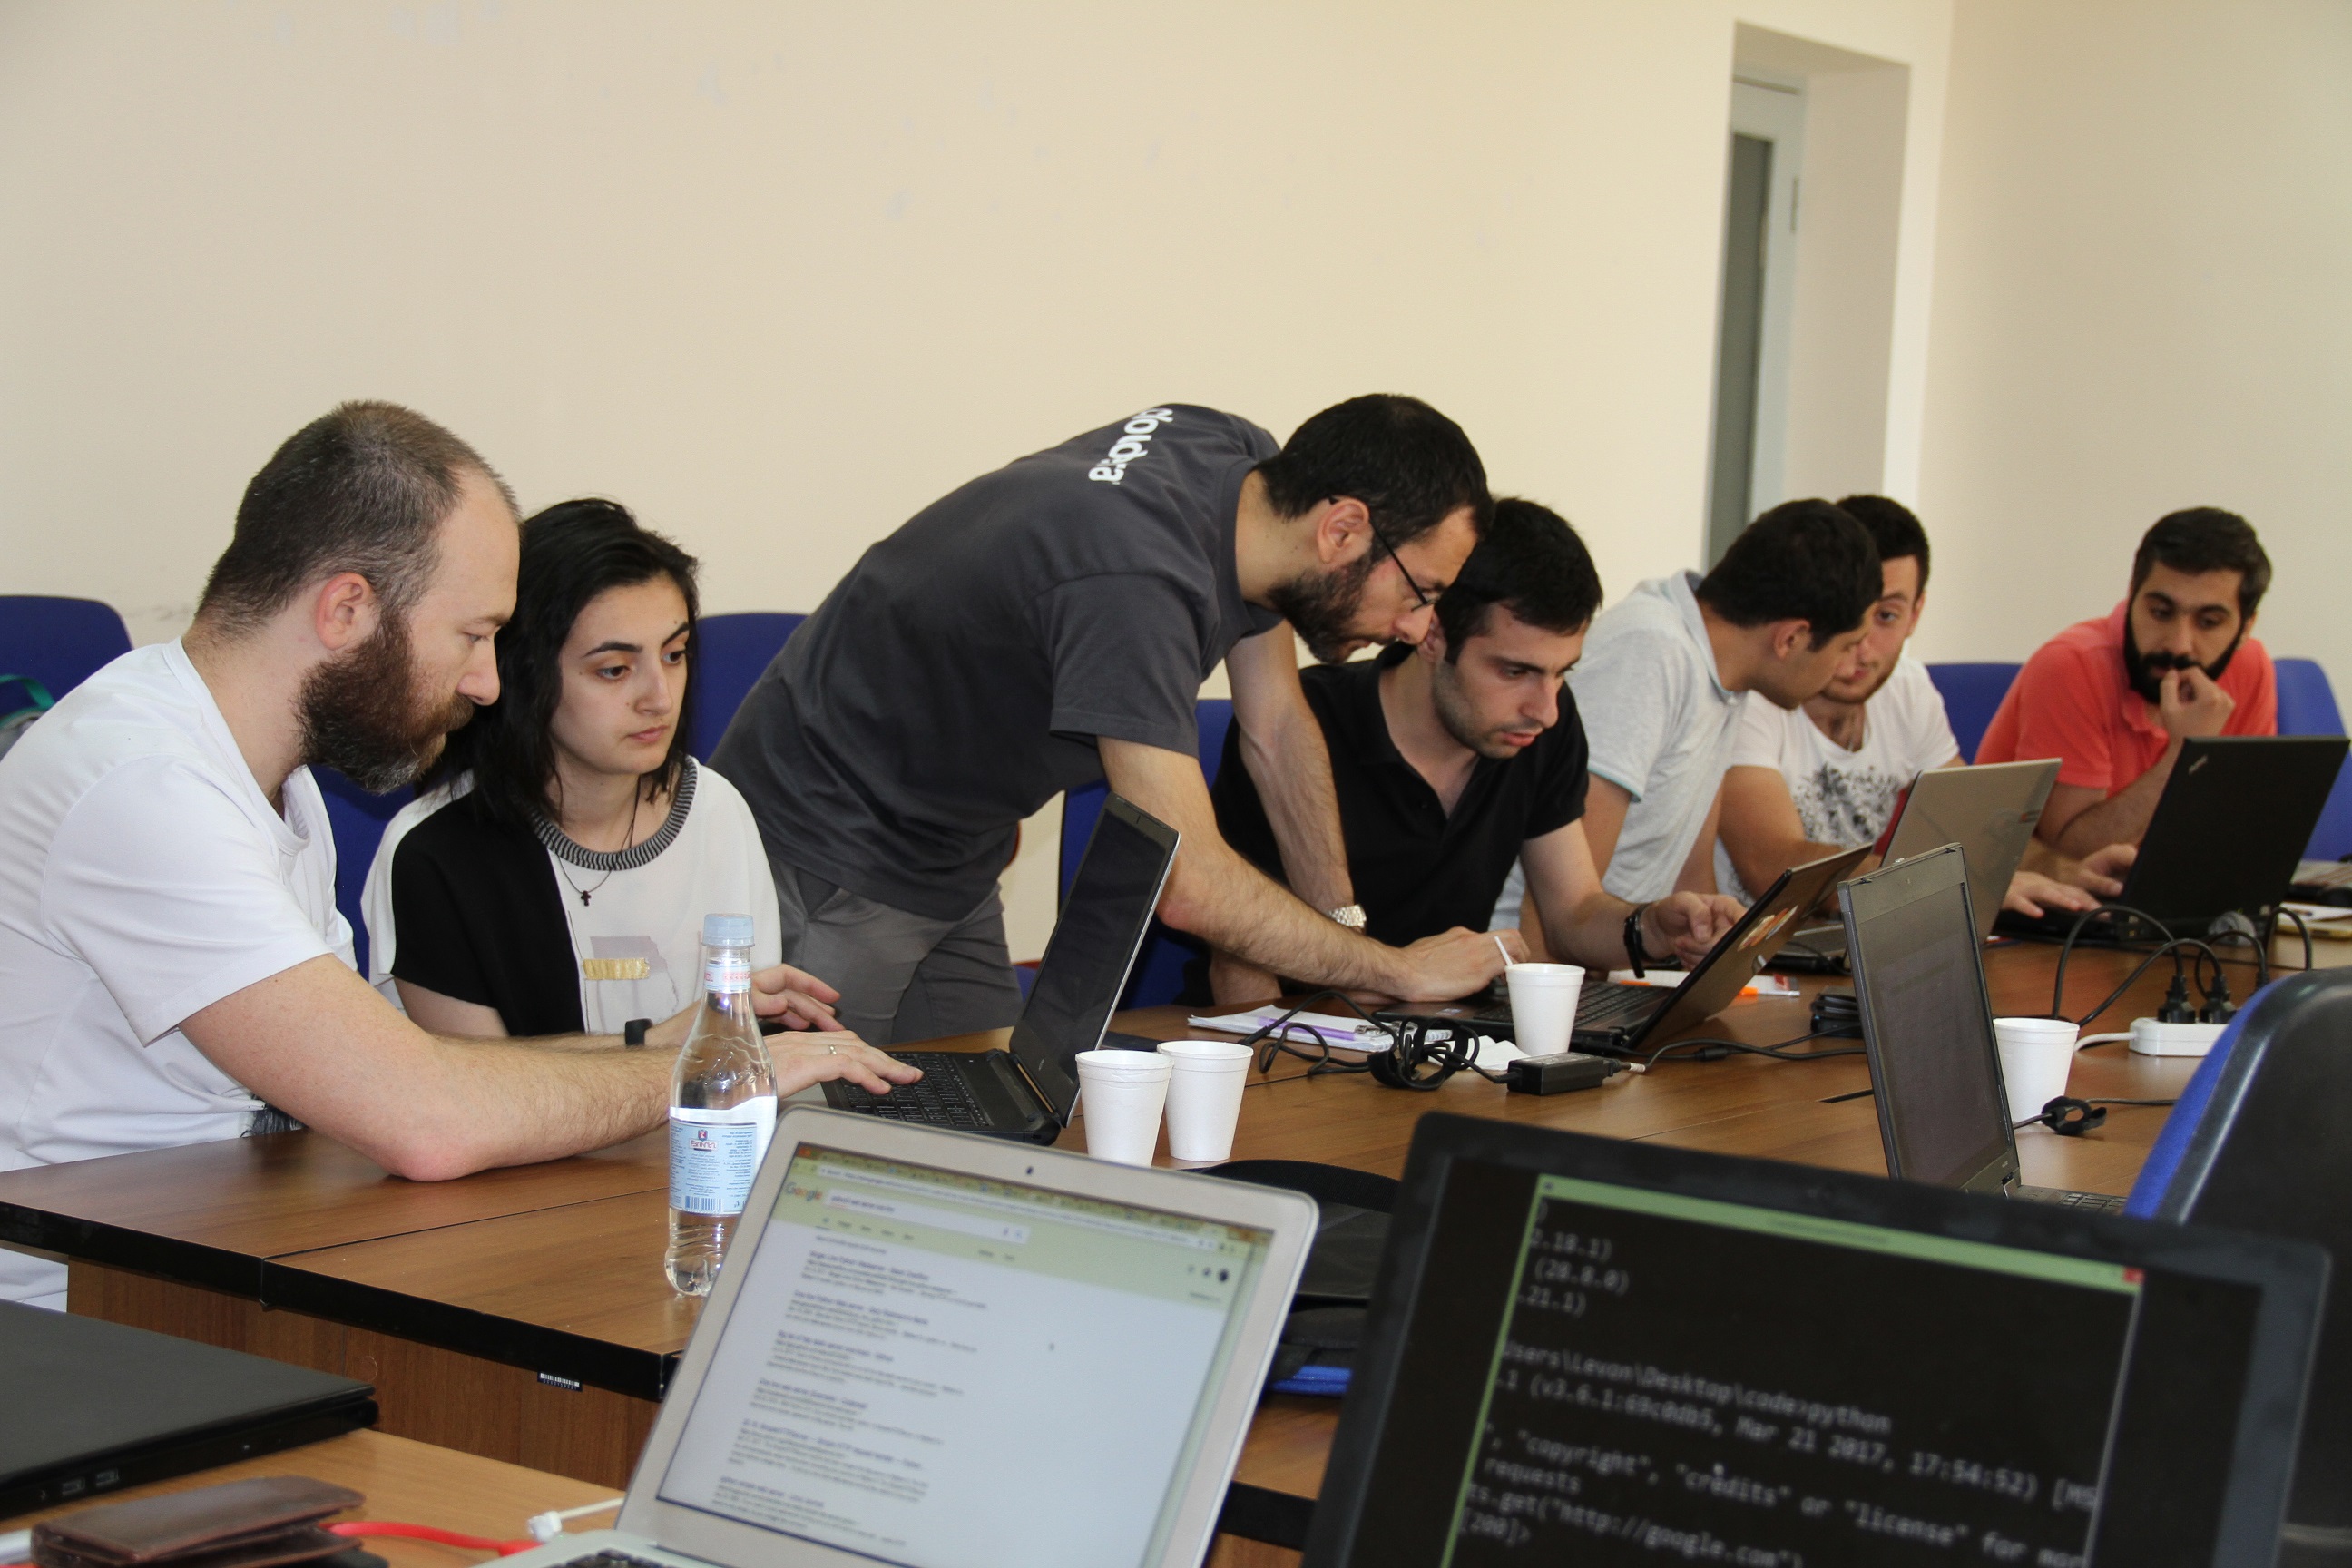 In Beeline a master class on Python programming language for Armenian IT specialists was held